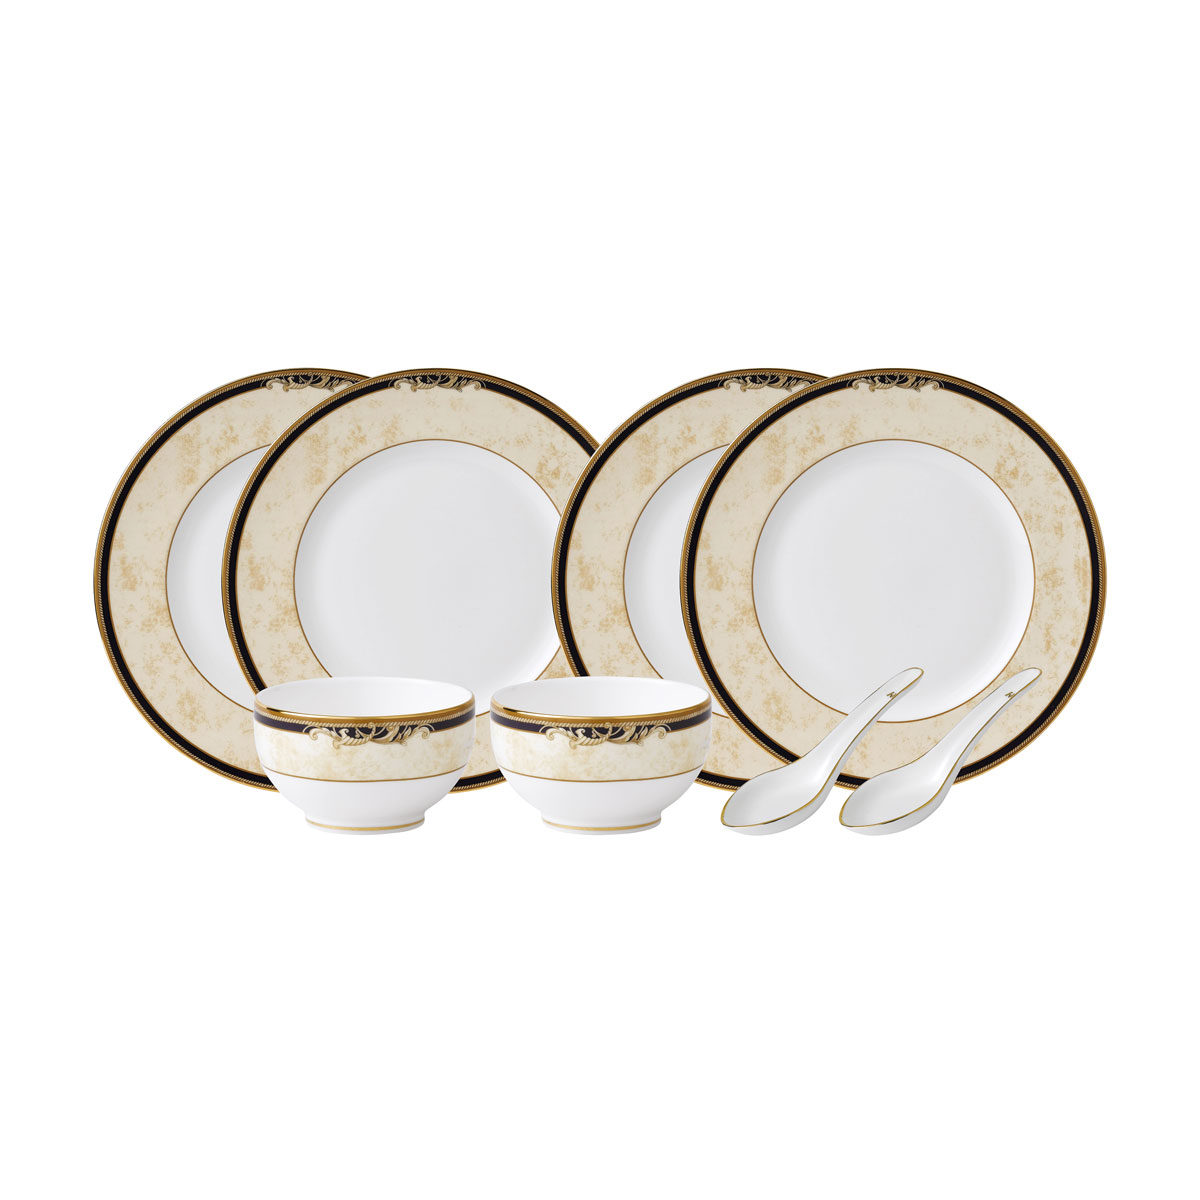 Wedgwood Cornucopia China Dining Set For Two With Spoons